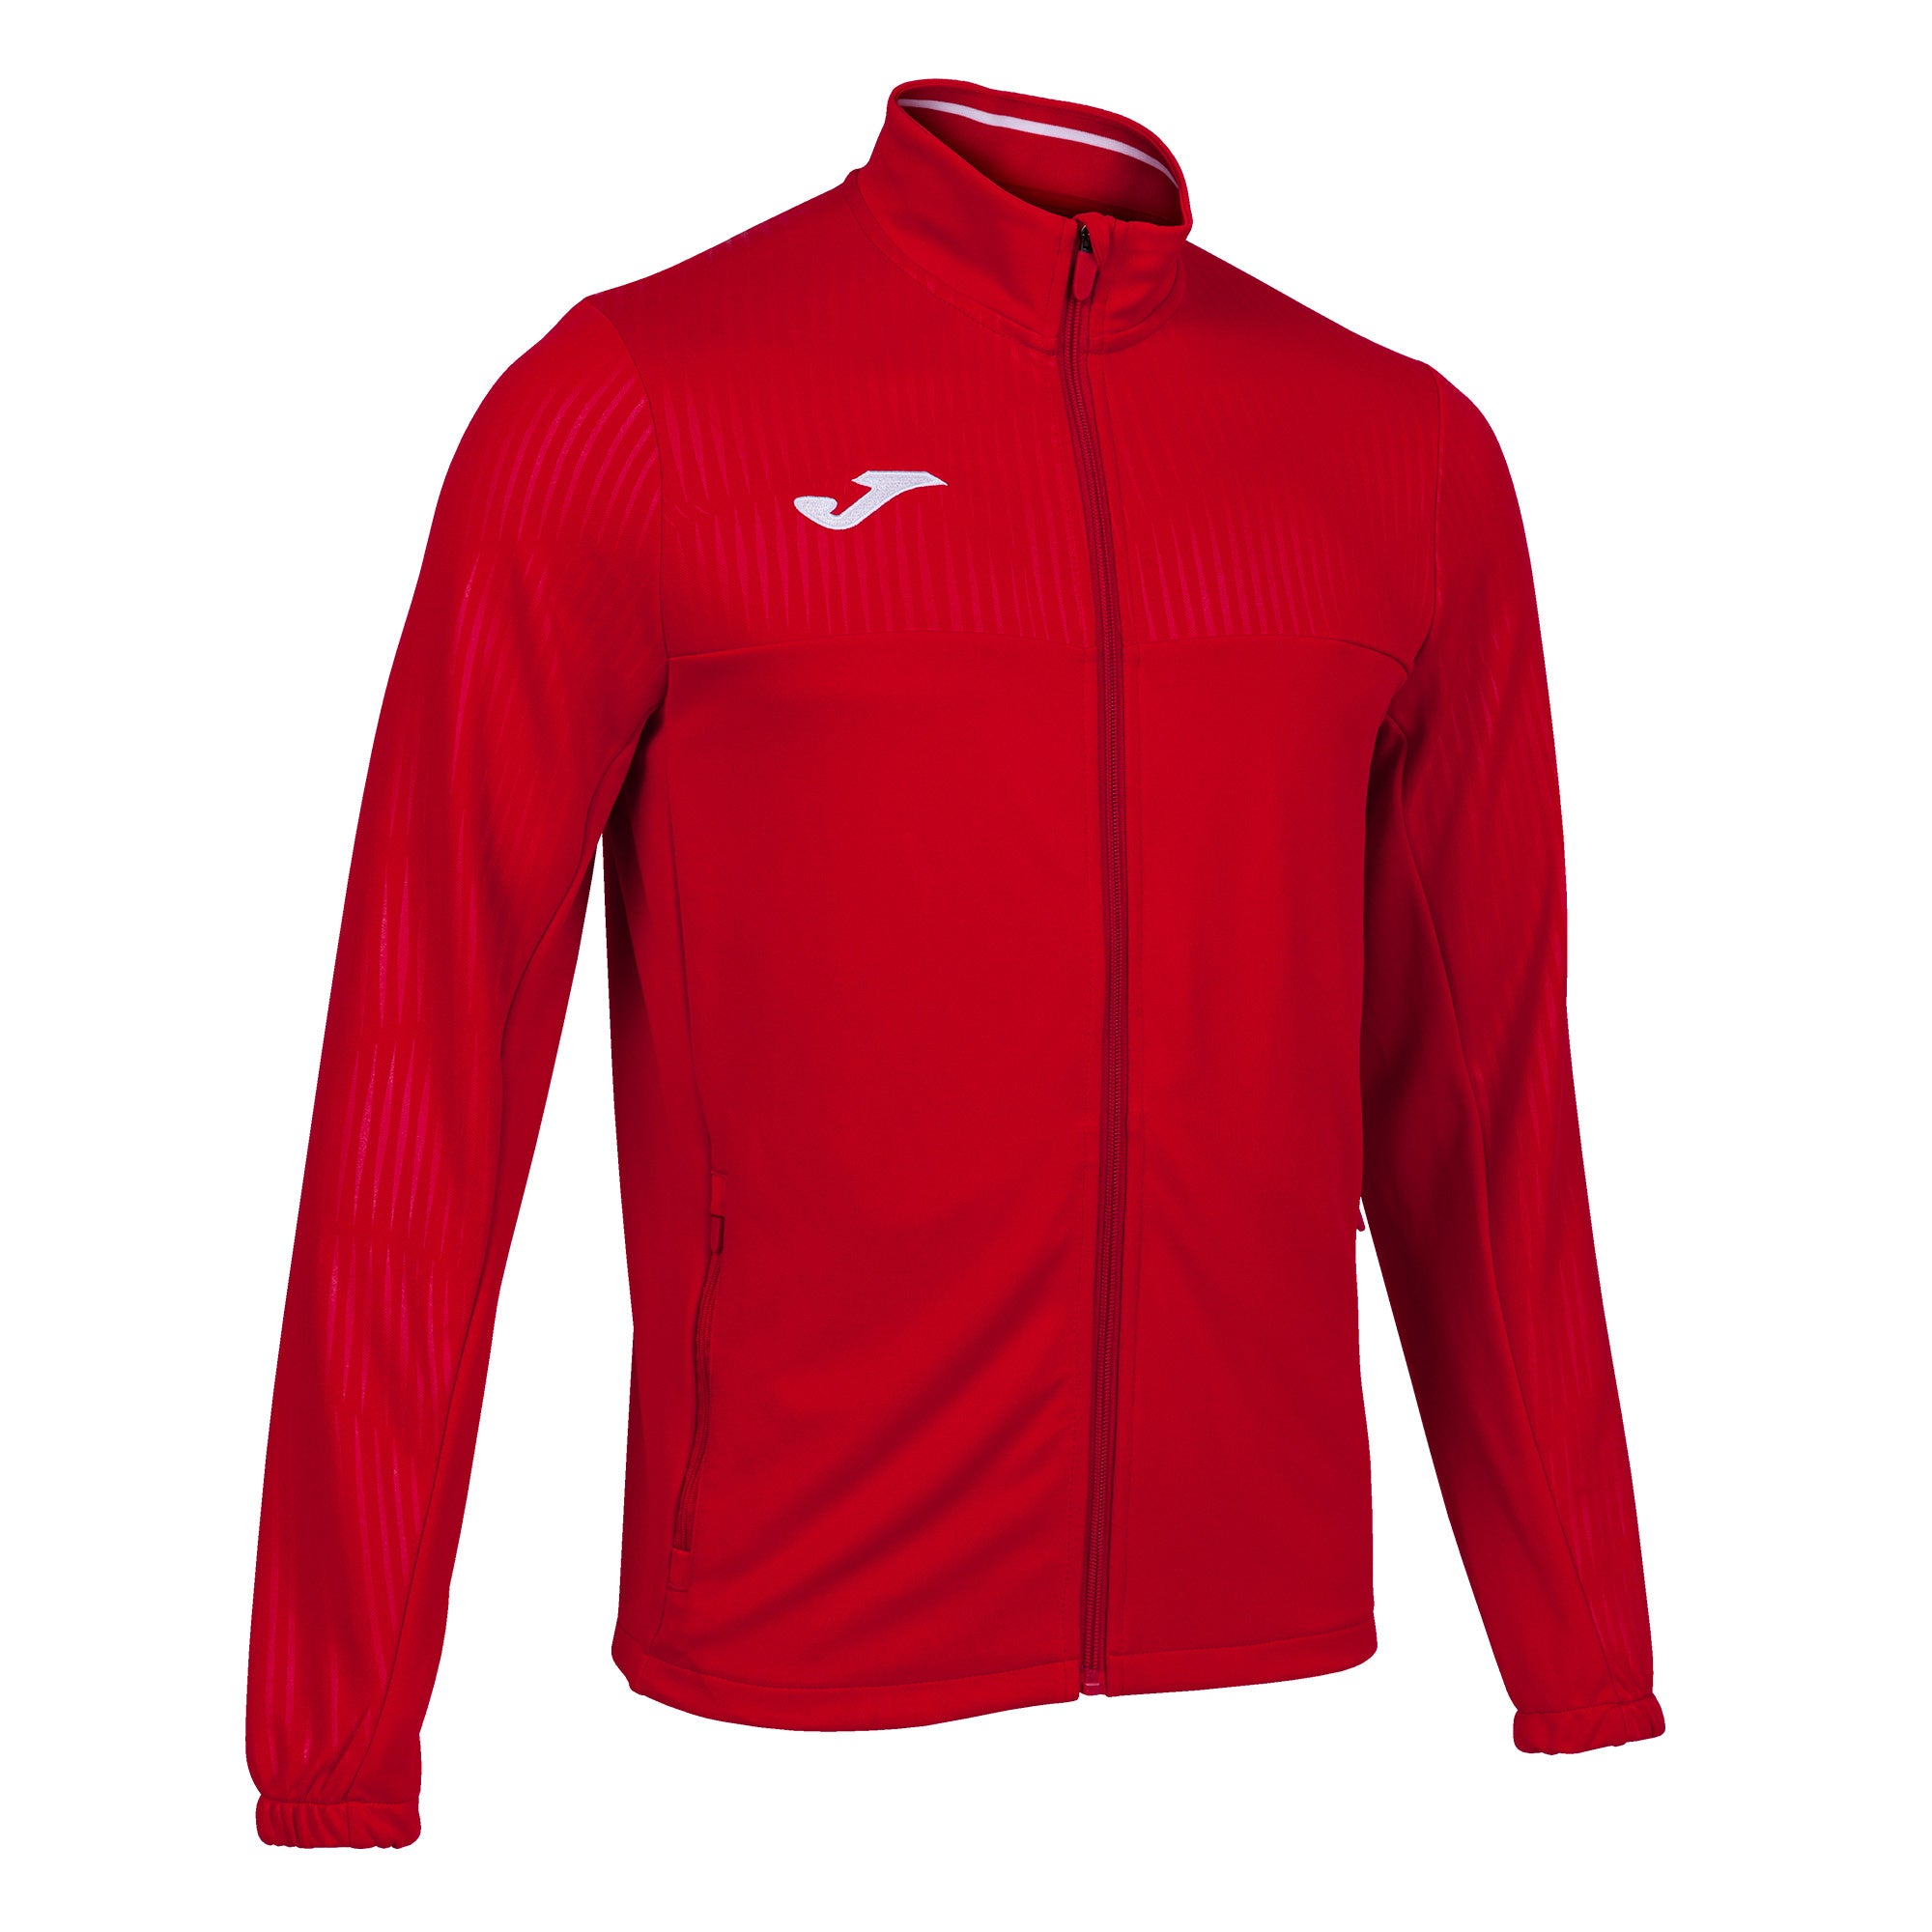 Joma Montreal Track Jacket Sweat - Red